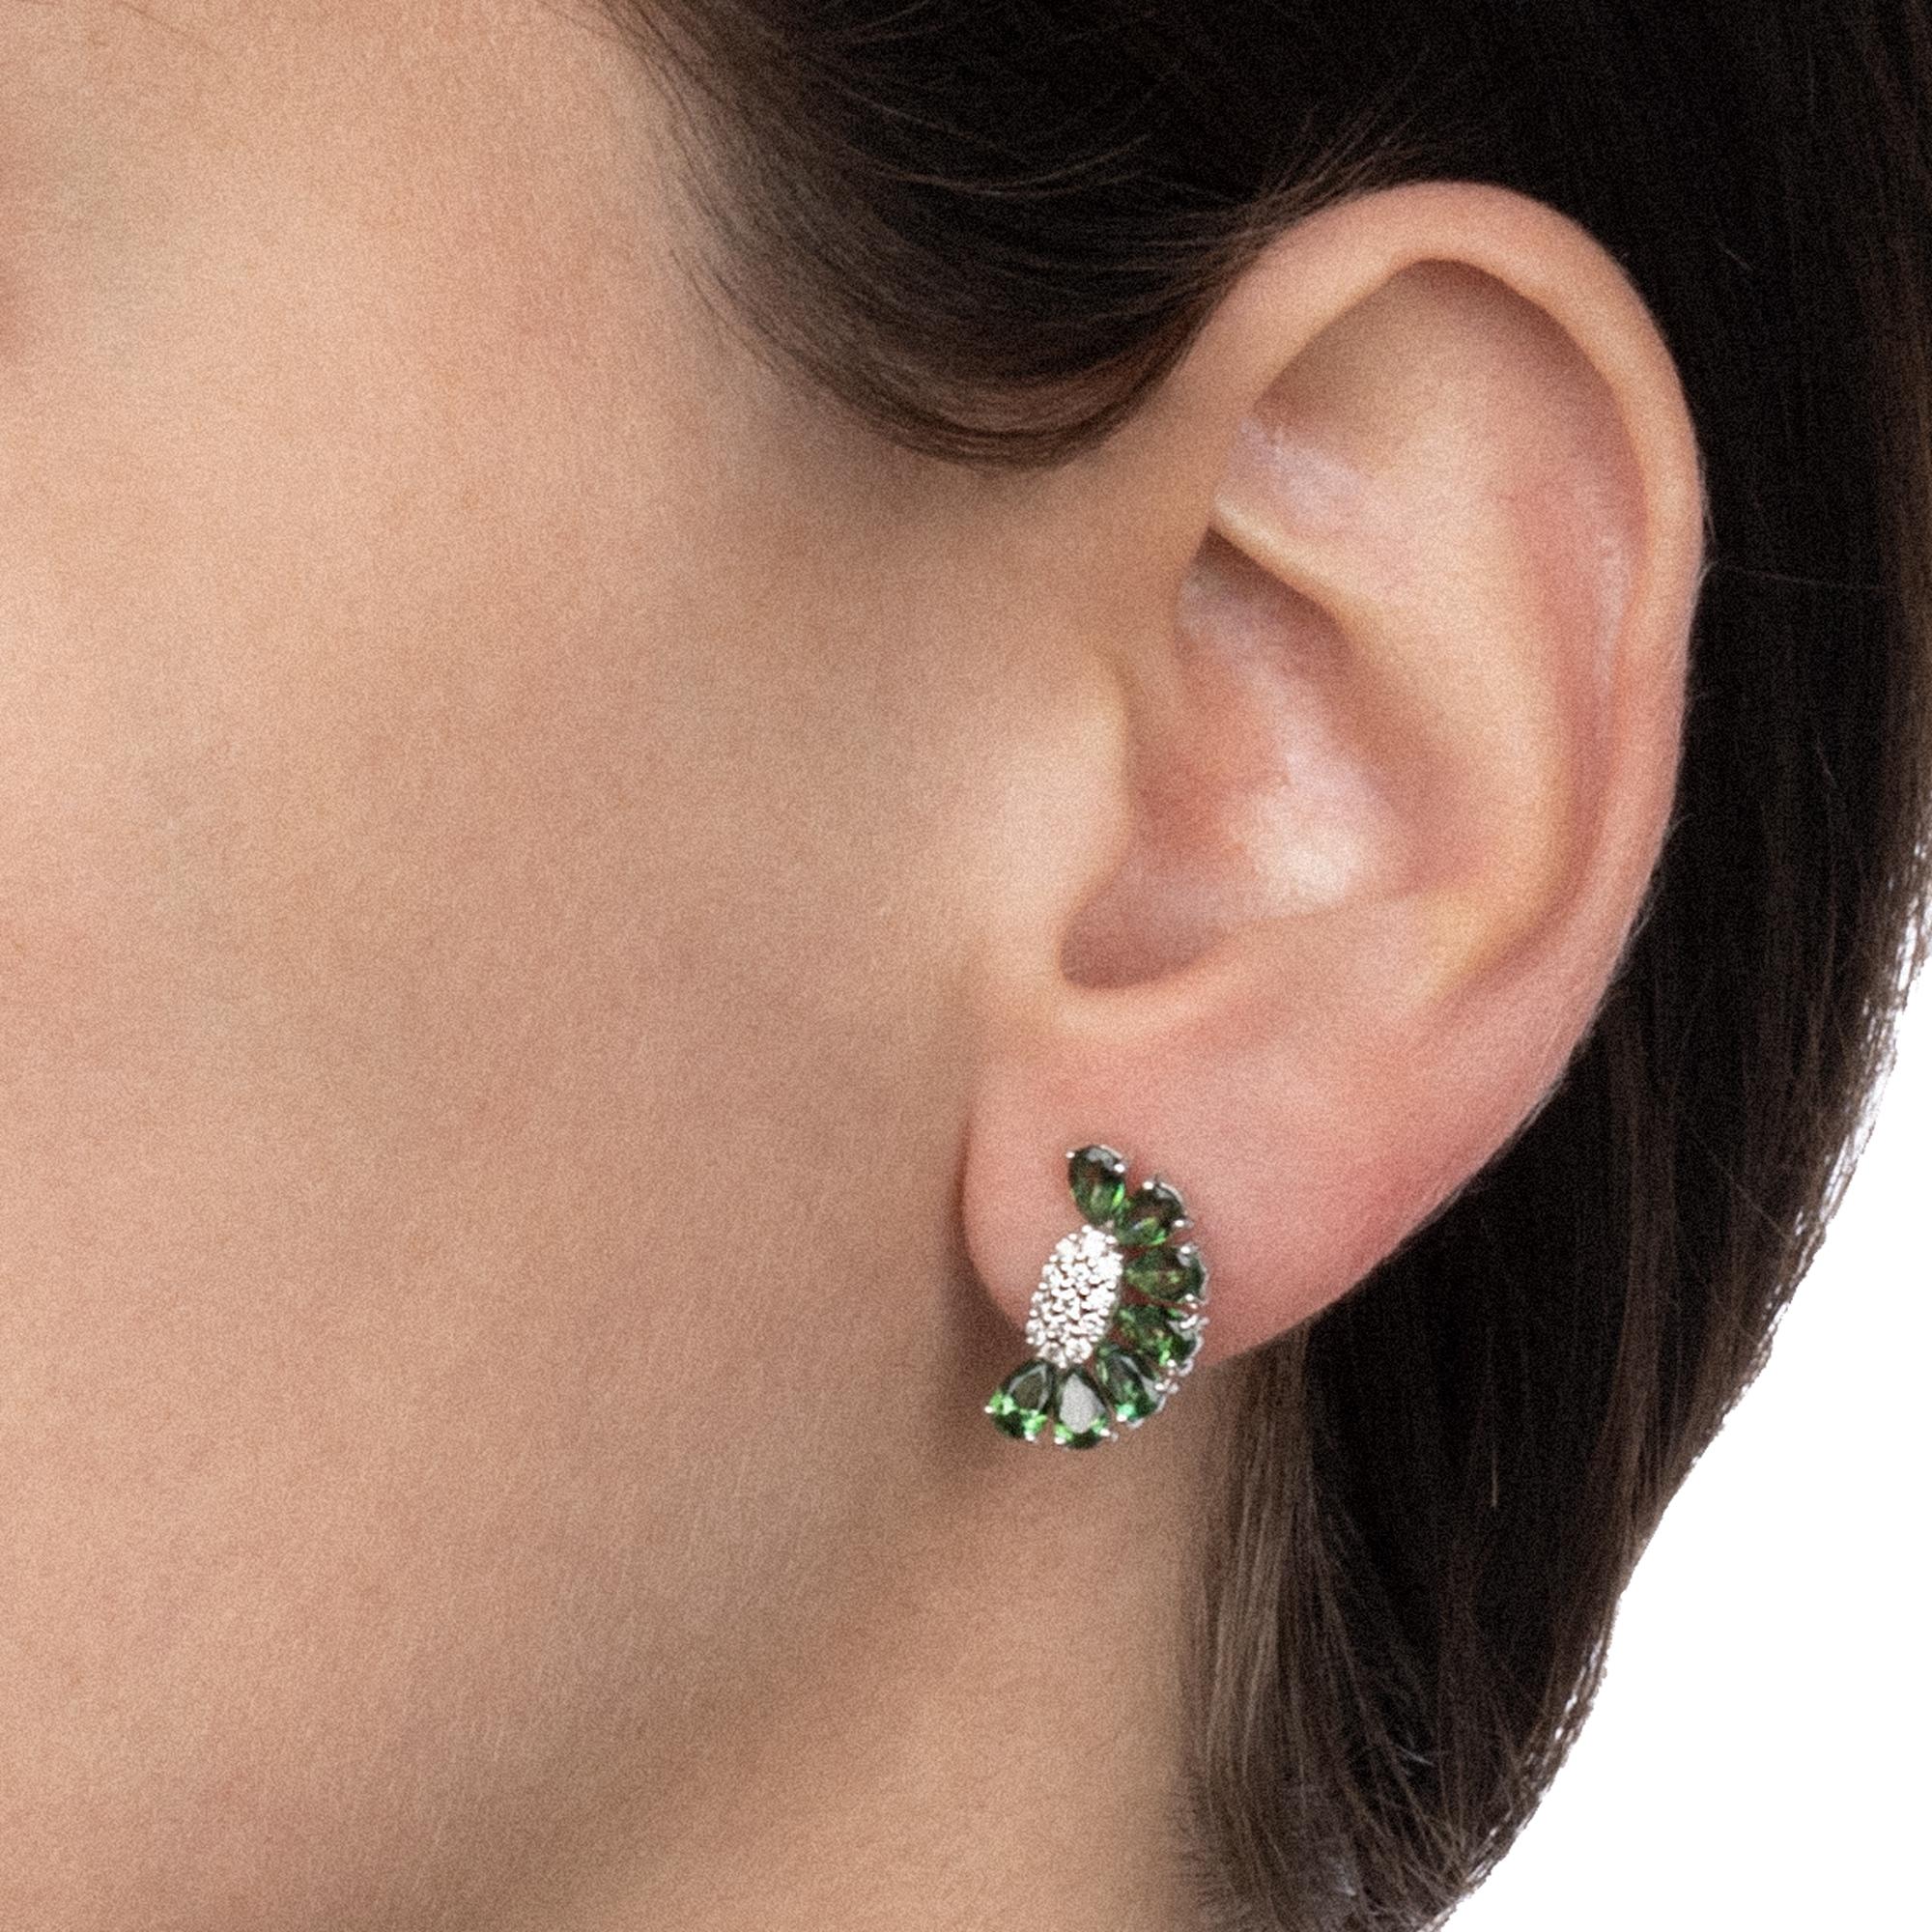 A classy set of earrings and a perfect combination of Italian traditional goldsmithing techniques and new technologies. Each earring has the shape of a half flower, and the vibrant green shade of the topaz gemstones adds a unique, fresh feel. The